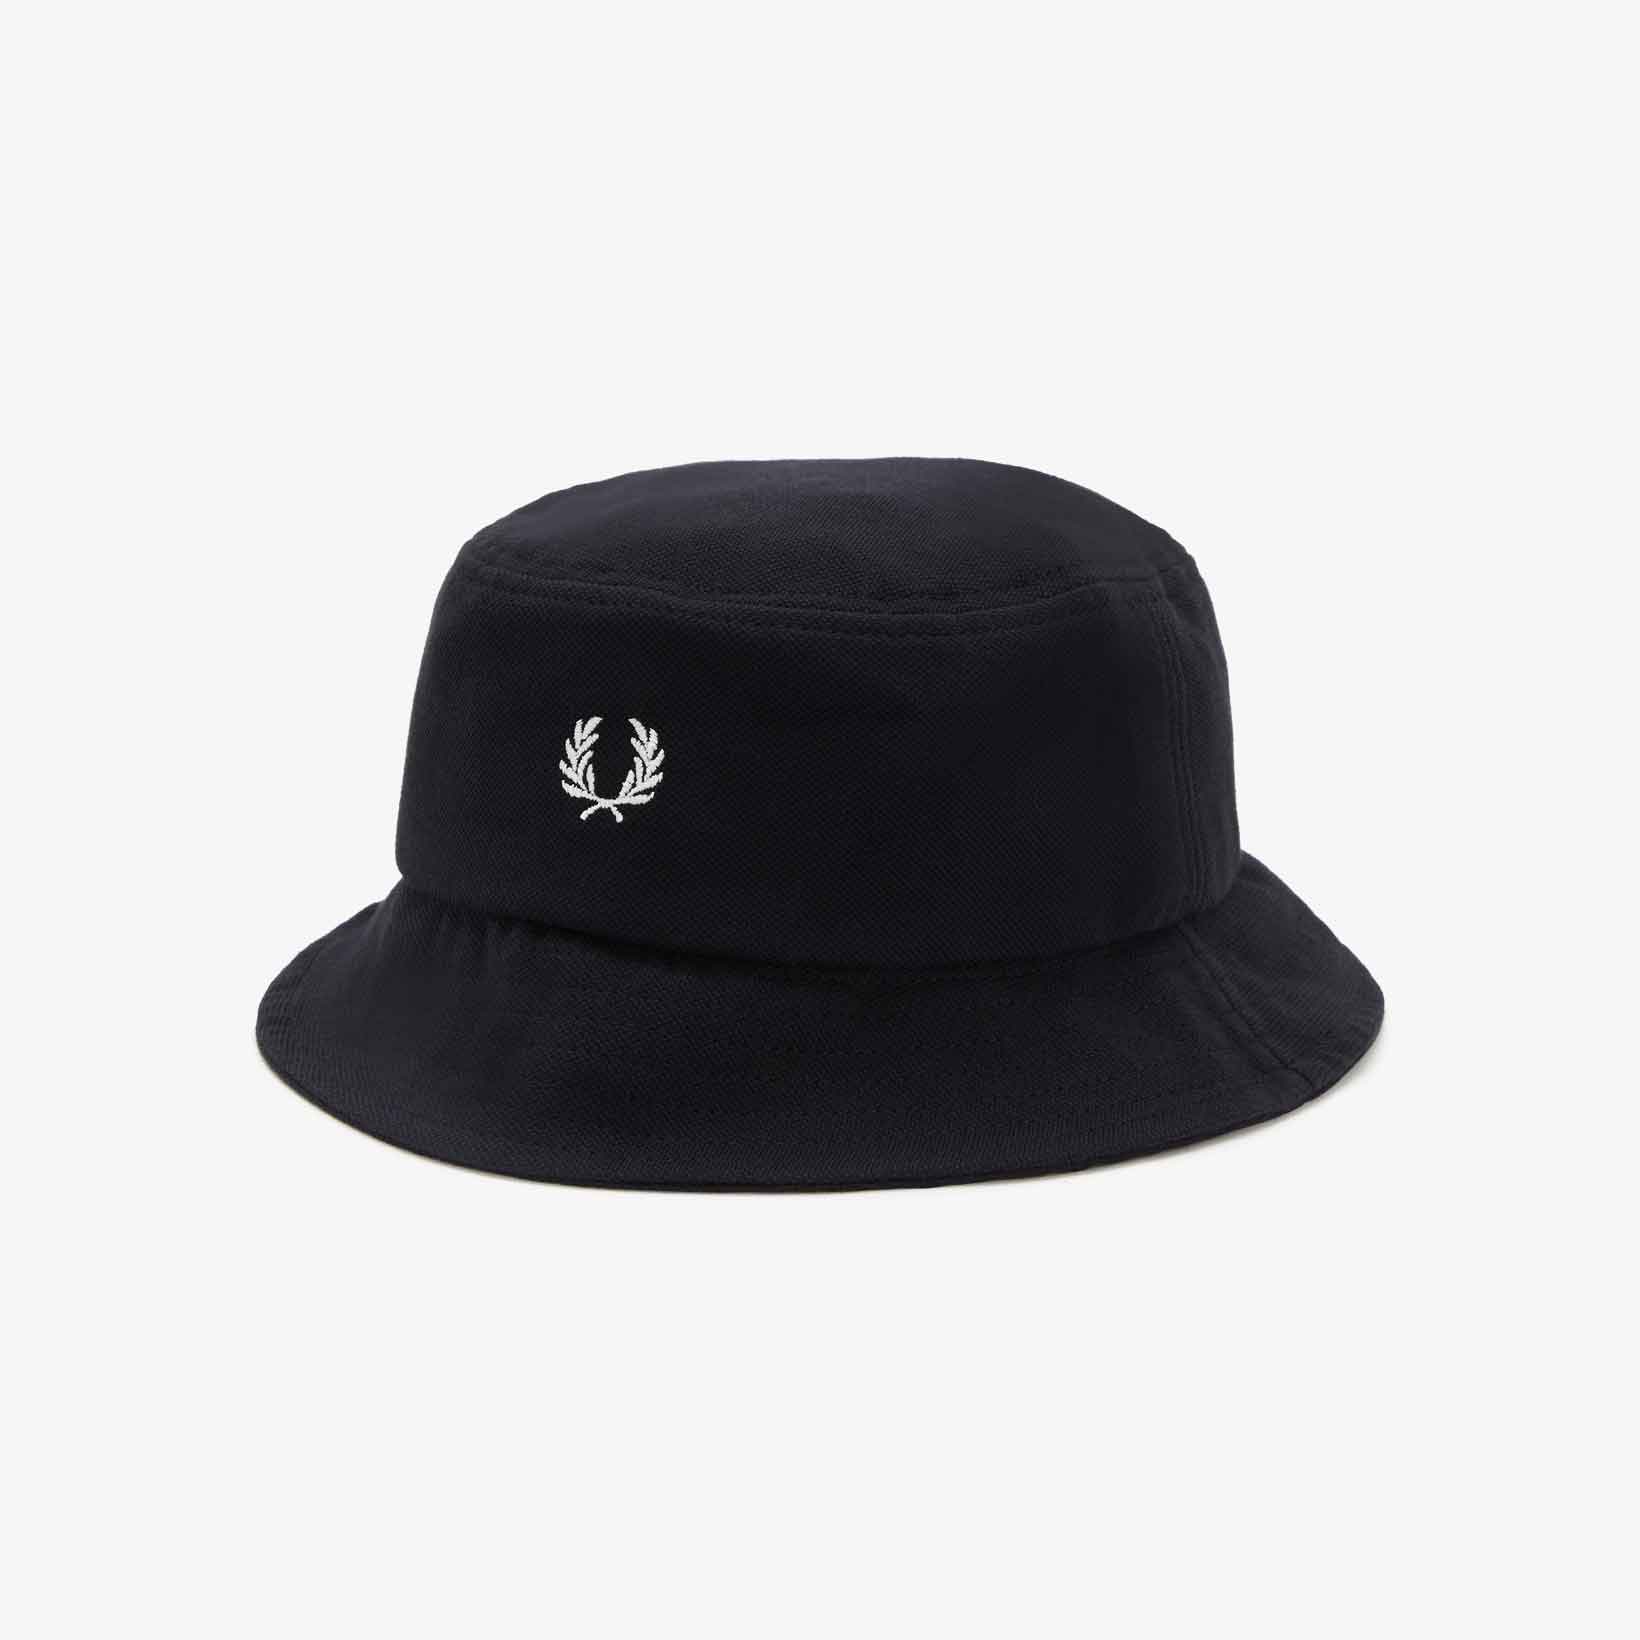 Fred Perry Pique Bucket Hat Black